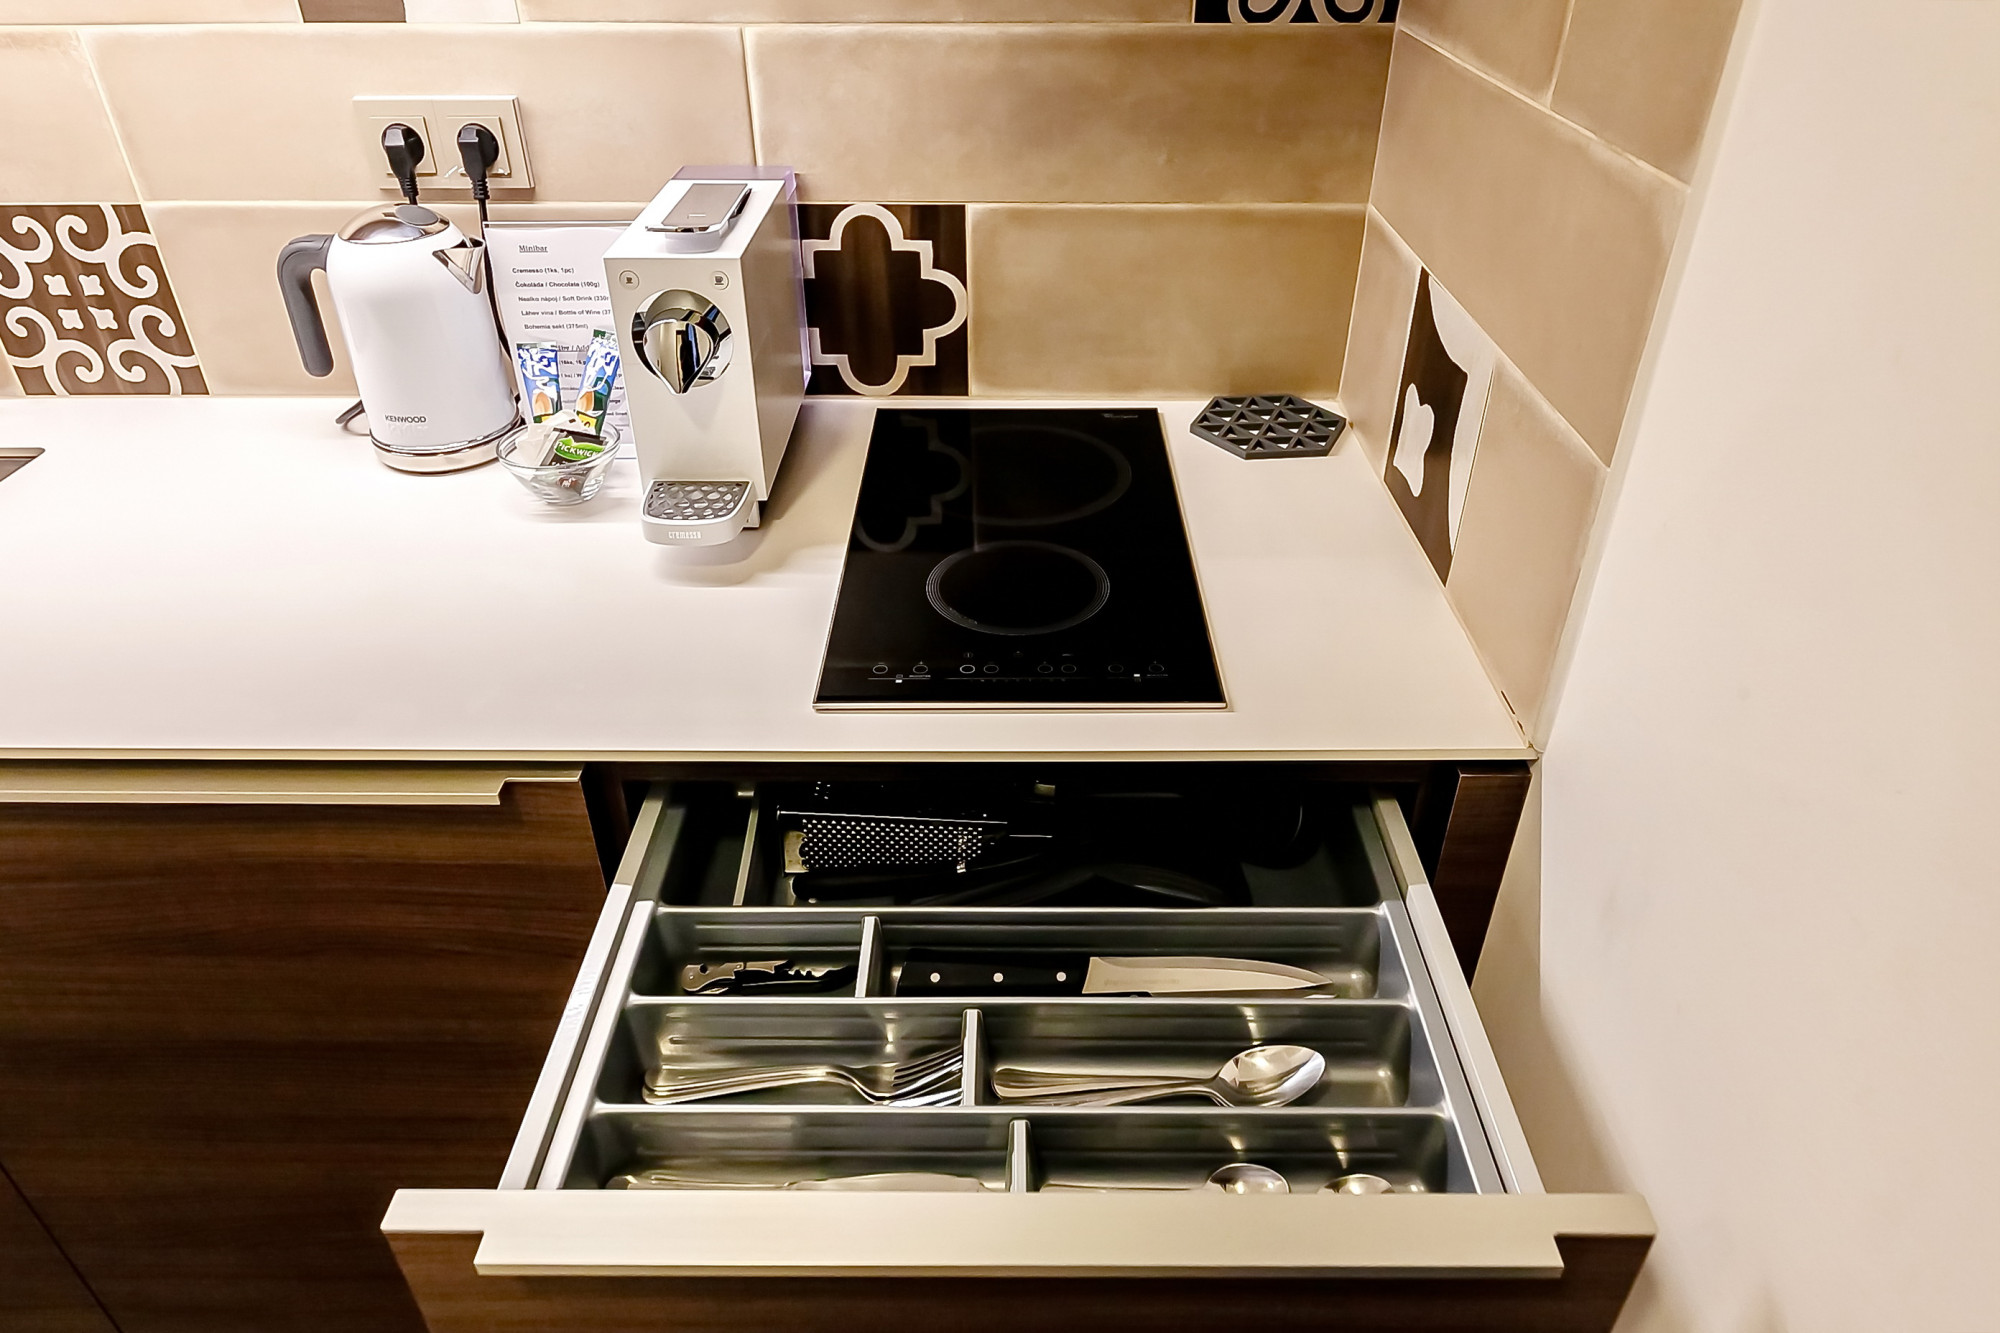 Fully equipped kitchen with sink, microwave, and toaster at Aparthotel Vinohradský dům Prague. Gallery.